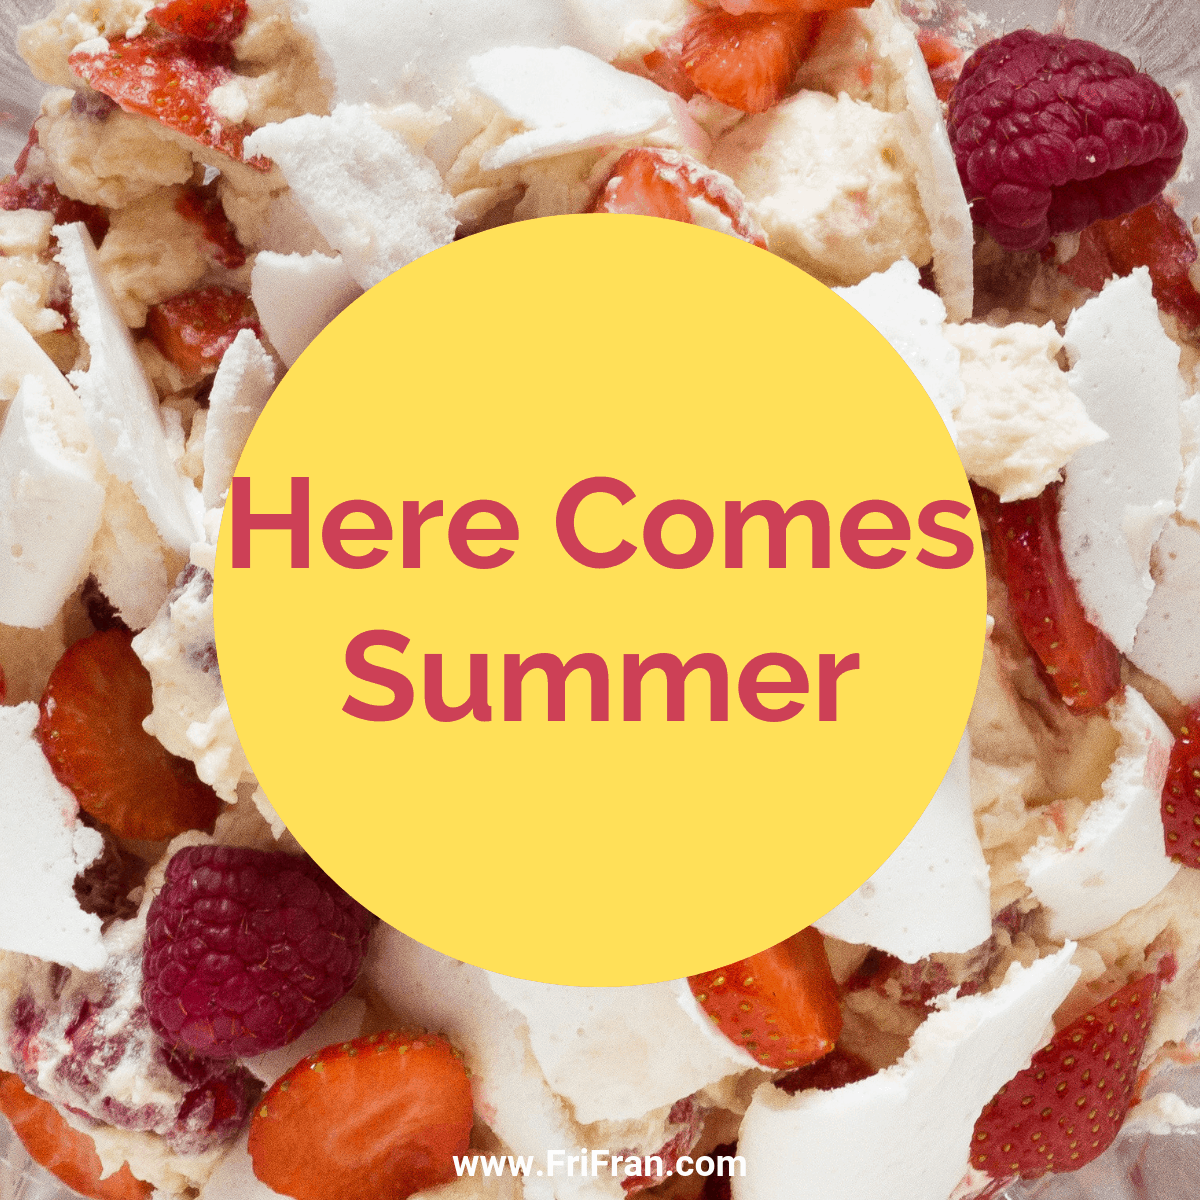 Here Comes Your Gluten-free and Vegan Summer